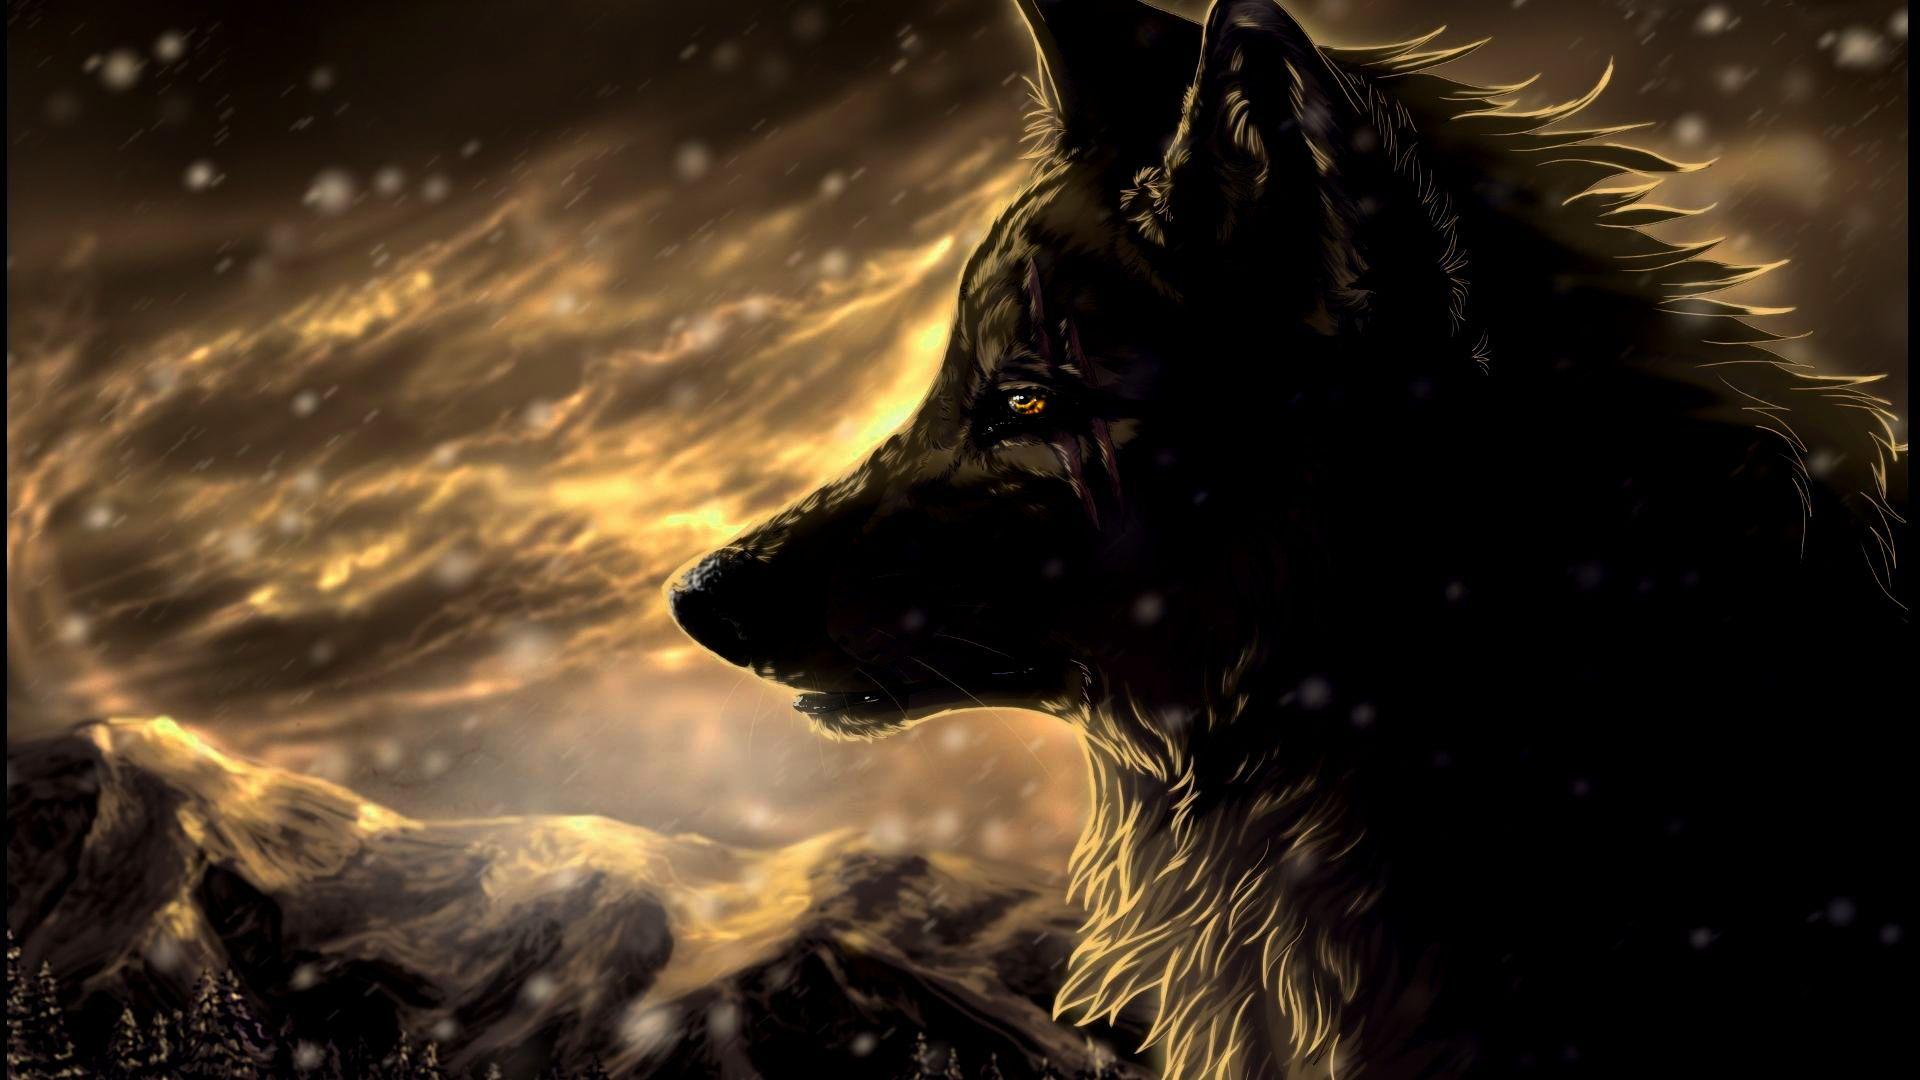 Cool Wolf Wallpaper. tianyihengfeng. Free Download High Definition